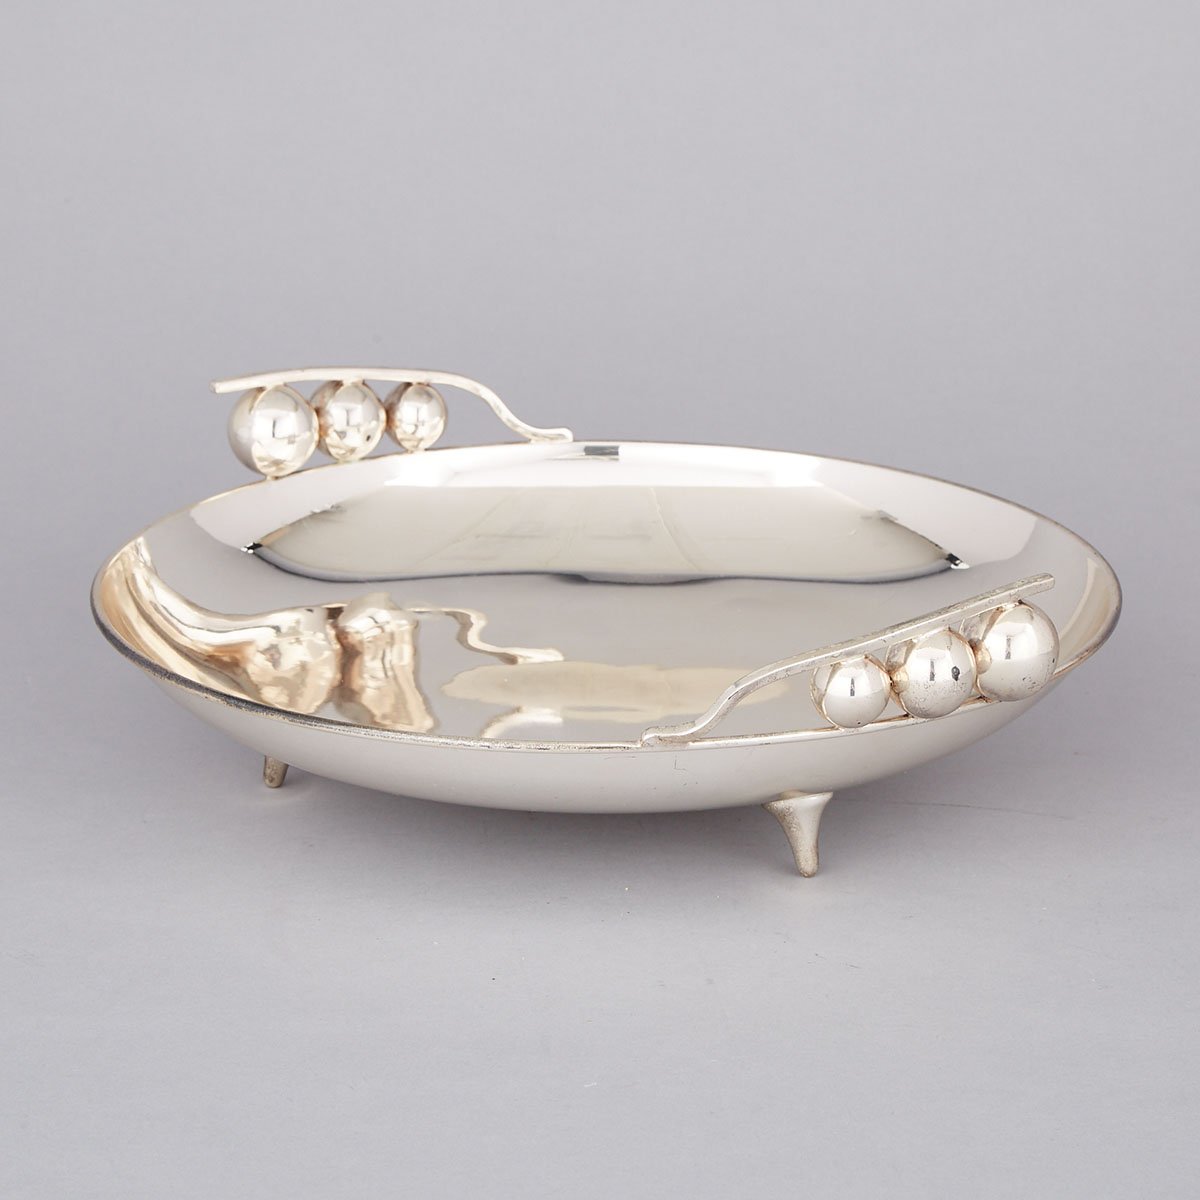 Mexican Modernist Silver Two-Handled Circular Bowl, C. Zurita, Mexico City, 20th century